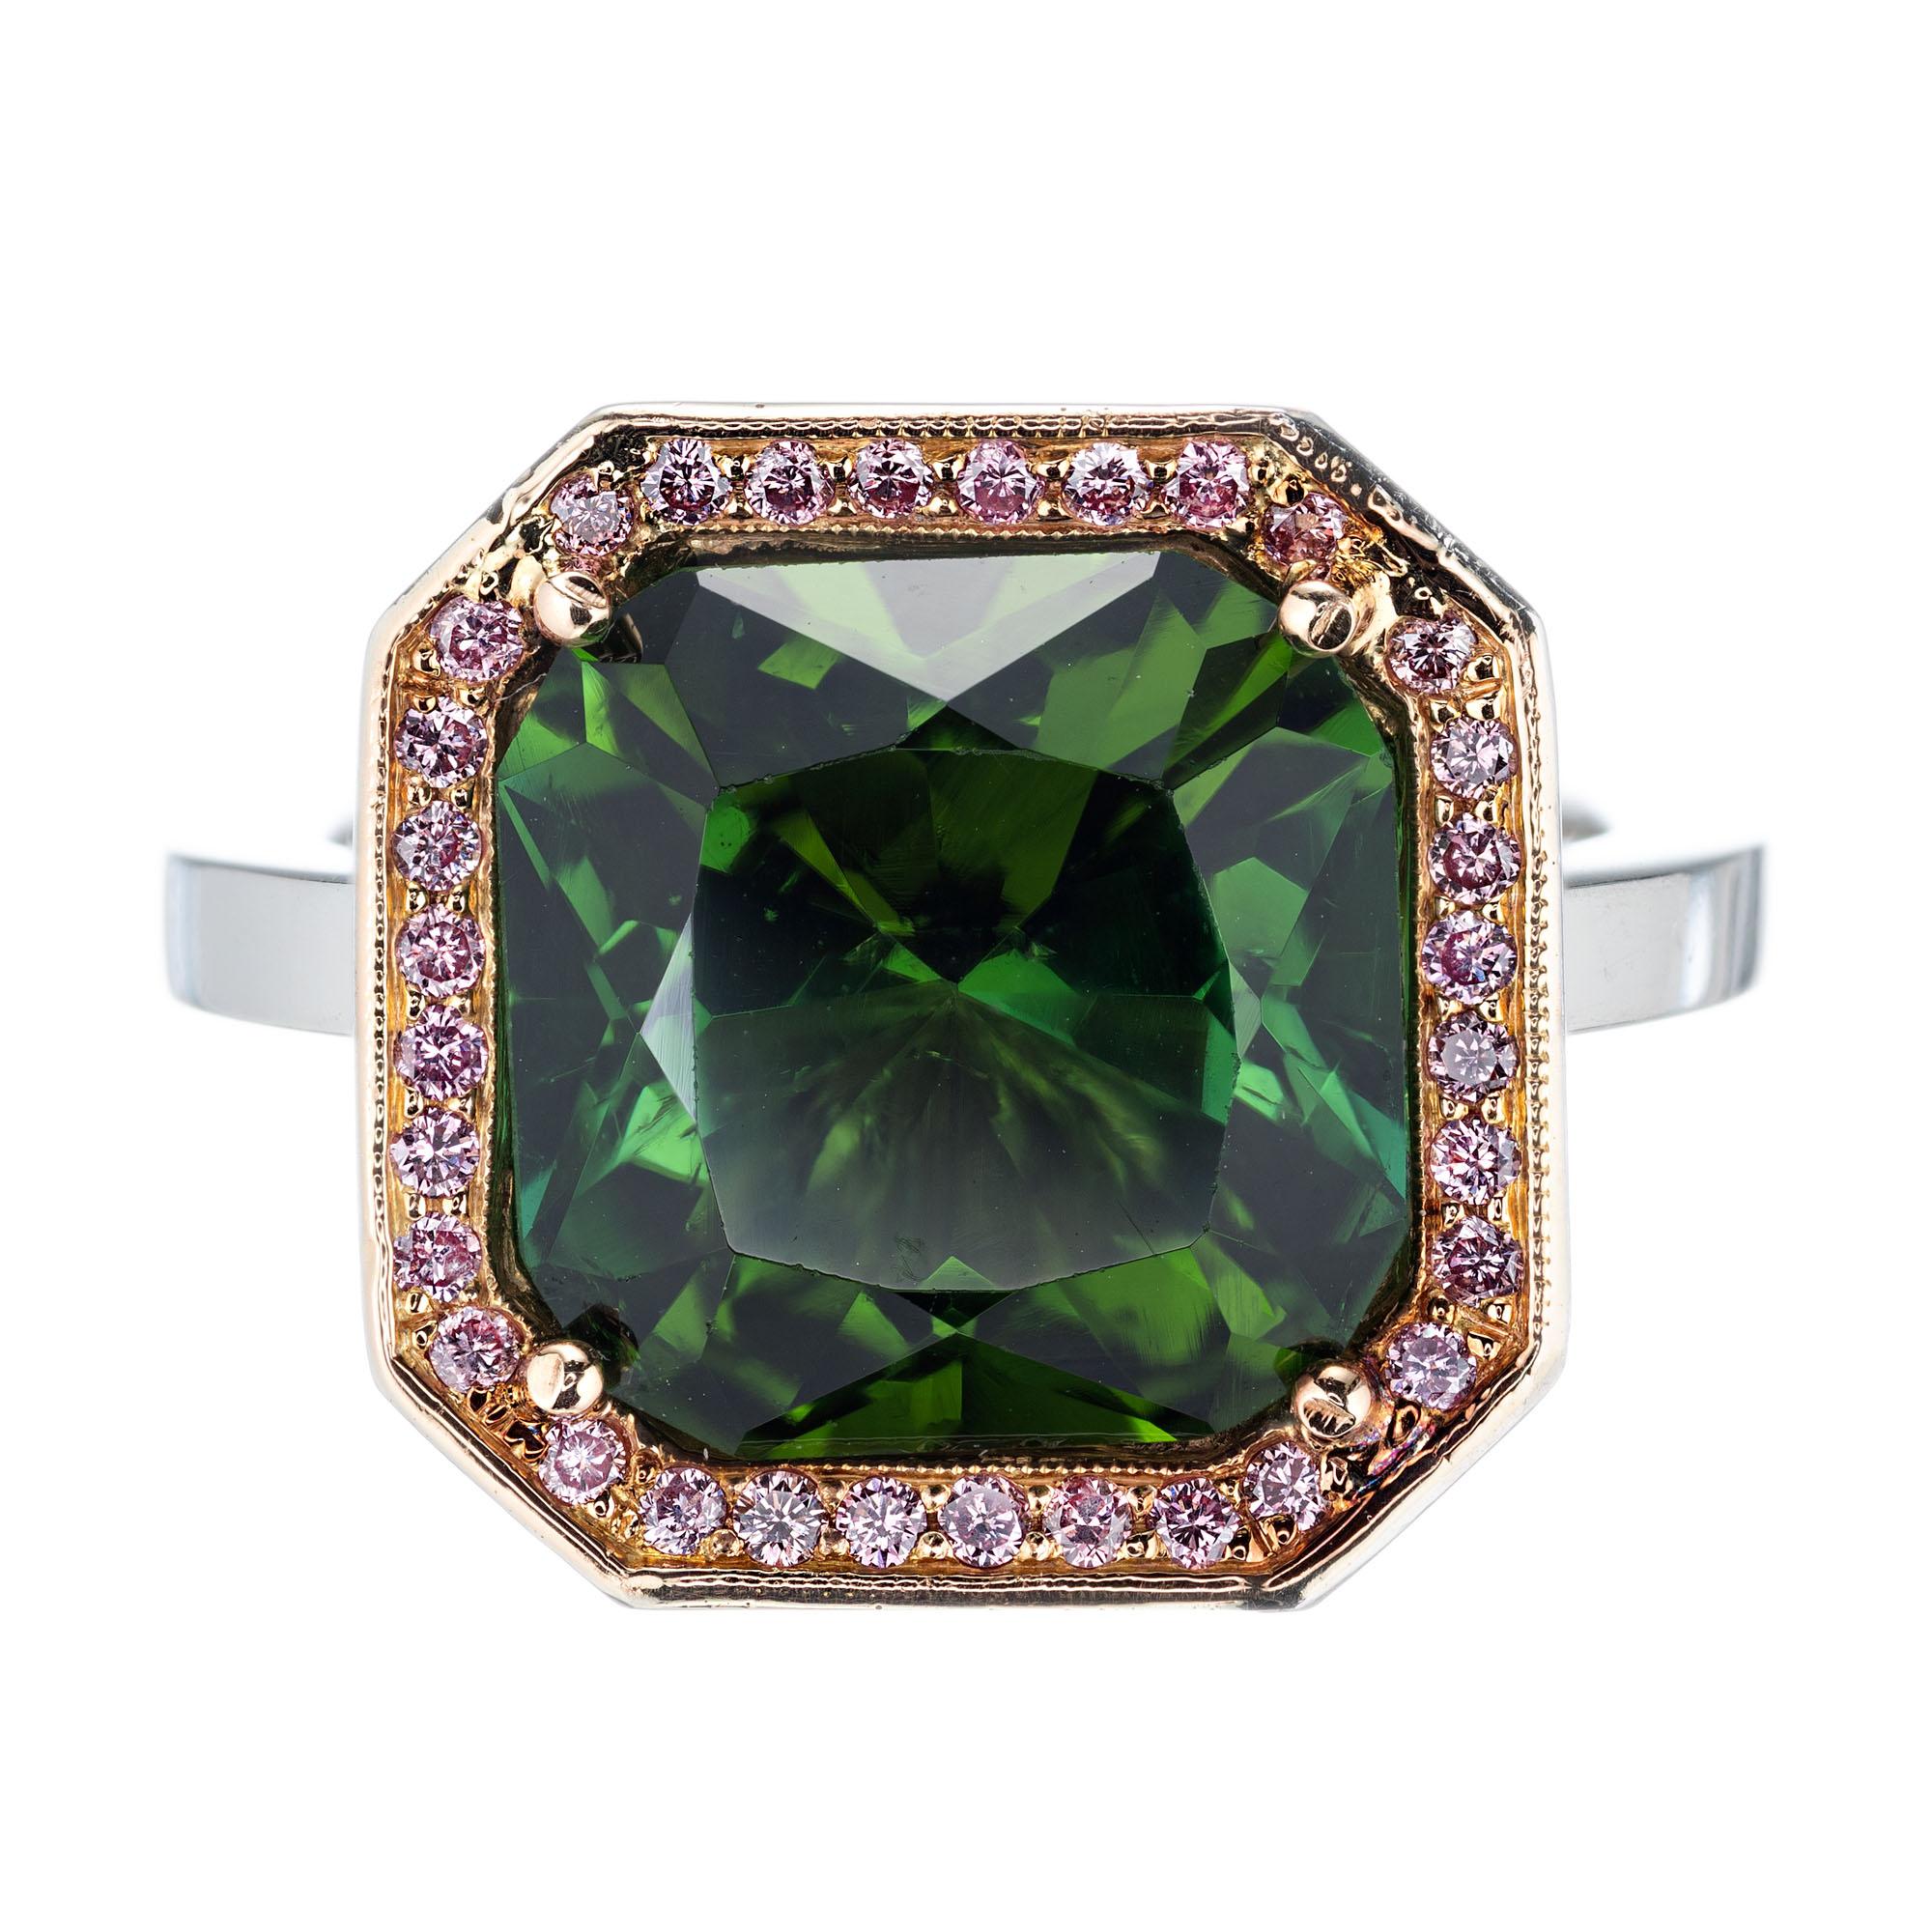 AGL certified octagonal 5.86cts deep bright green tourmaline in a simple handmade Platinum and rose gold setting accented with natural pink diamonds and rose gold scroll inlay.  

1 octagonal rich green Tourmaline, approx. total weight 5.86cts,